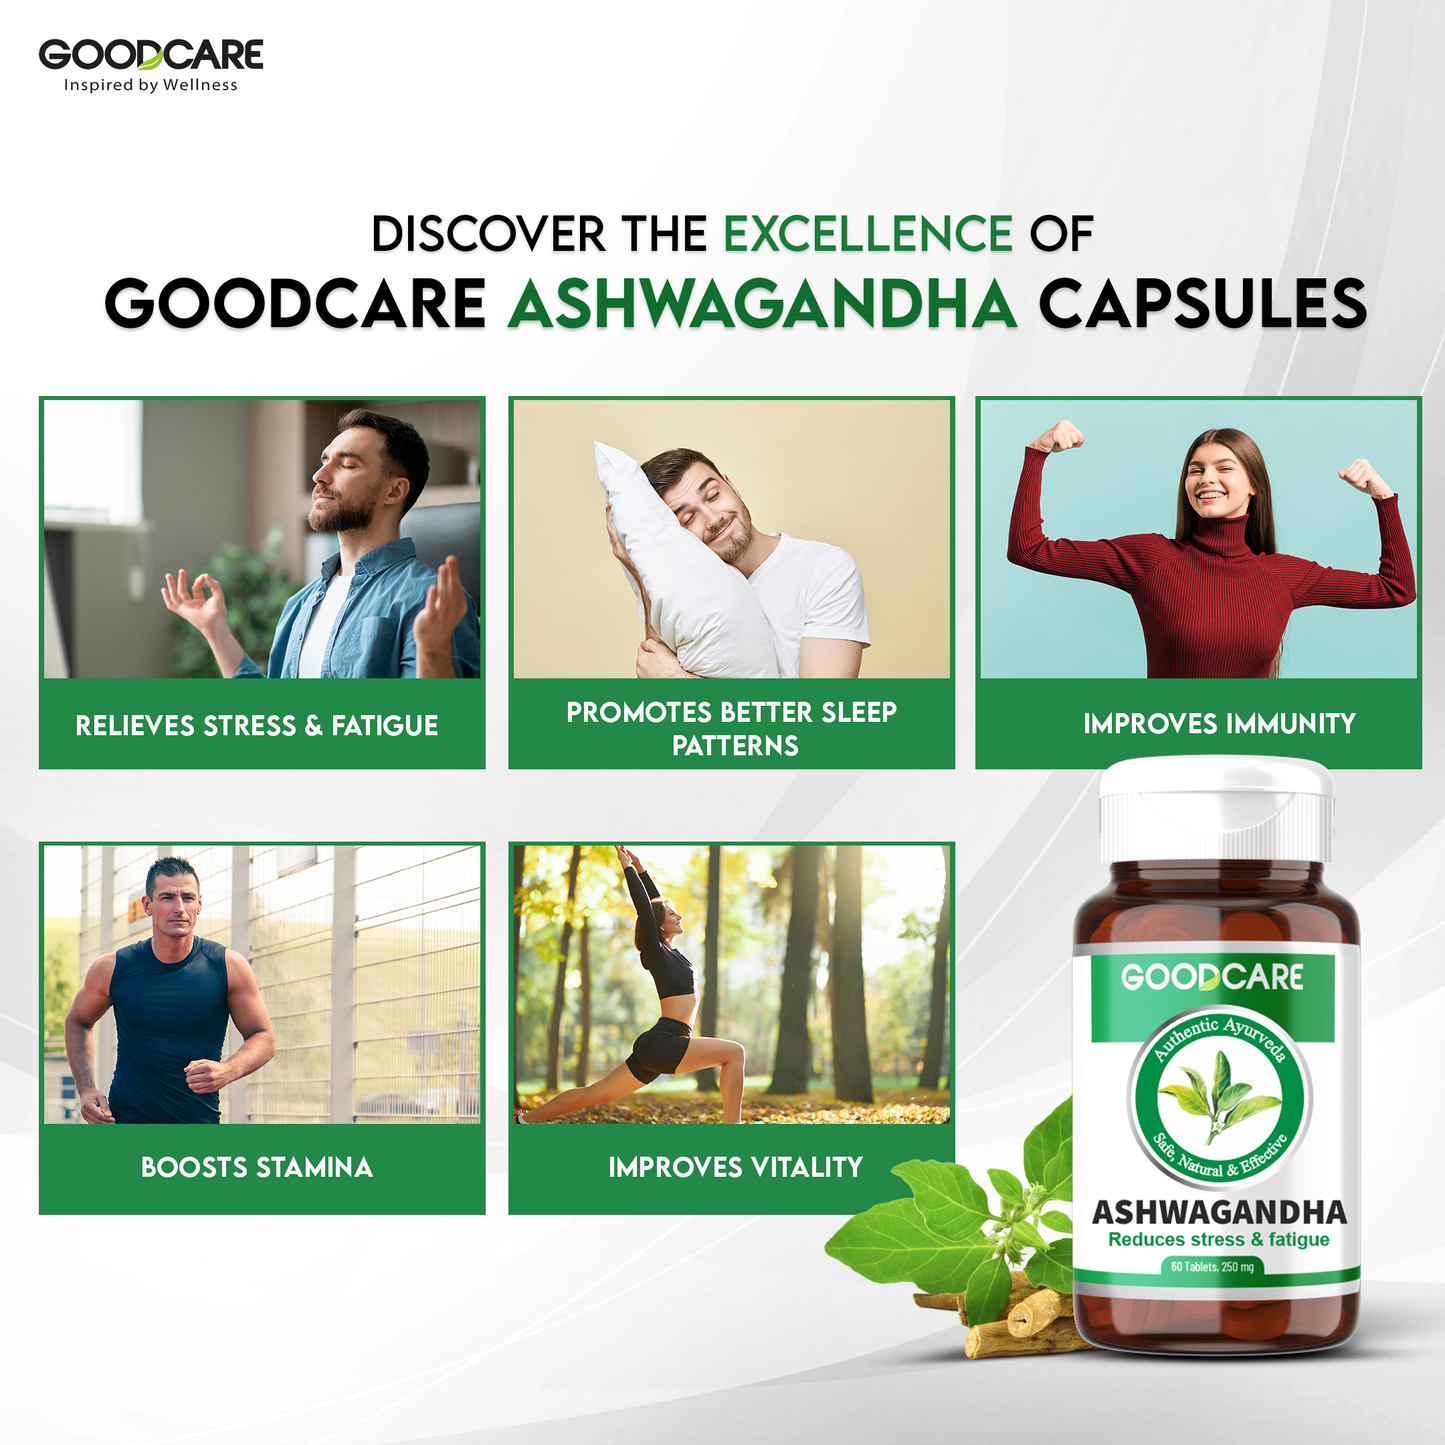 GOODCARE Ashwagandha Tablets | Stress Relief, Relaxes Mind & Body and promotes good sleep, Improves Strength, Energy & Wellness - 60 Tablets